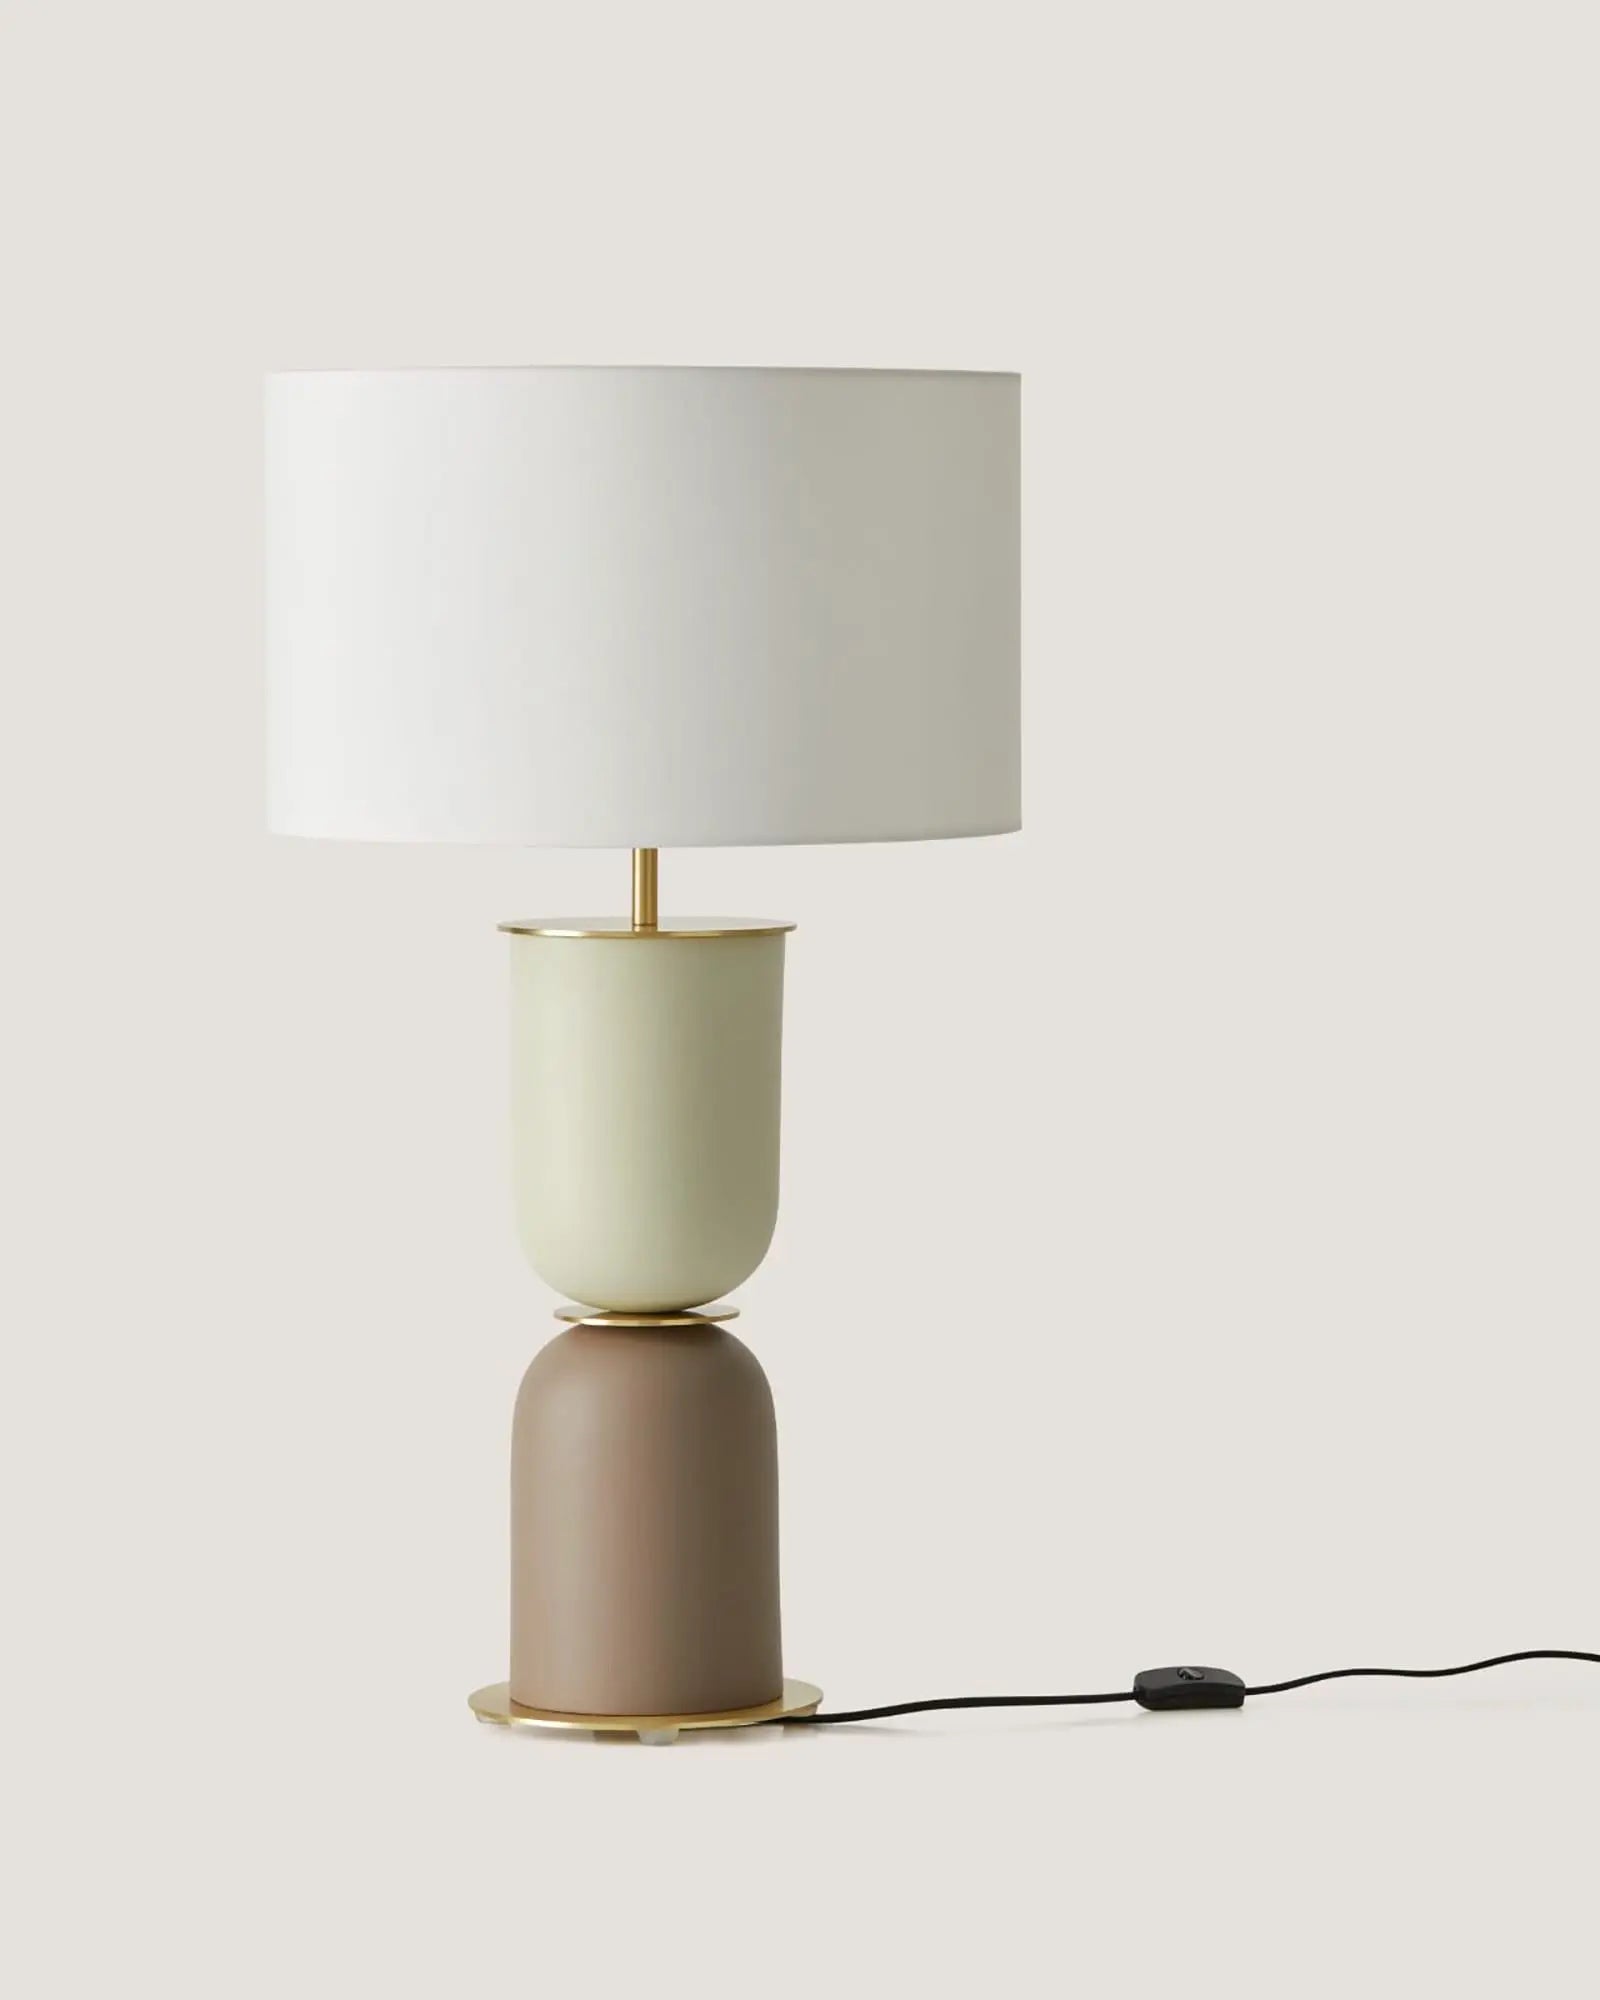 Copo contemporary ceramic and fabric table lamp product photo